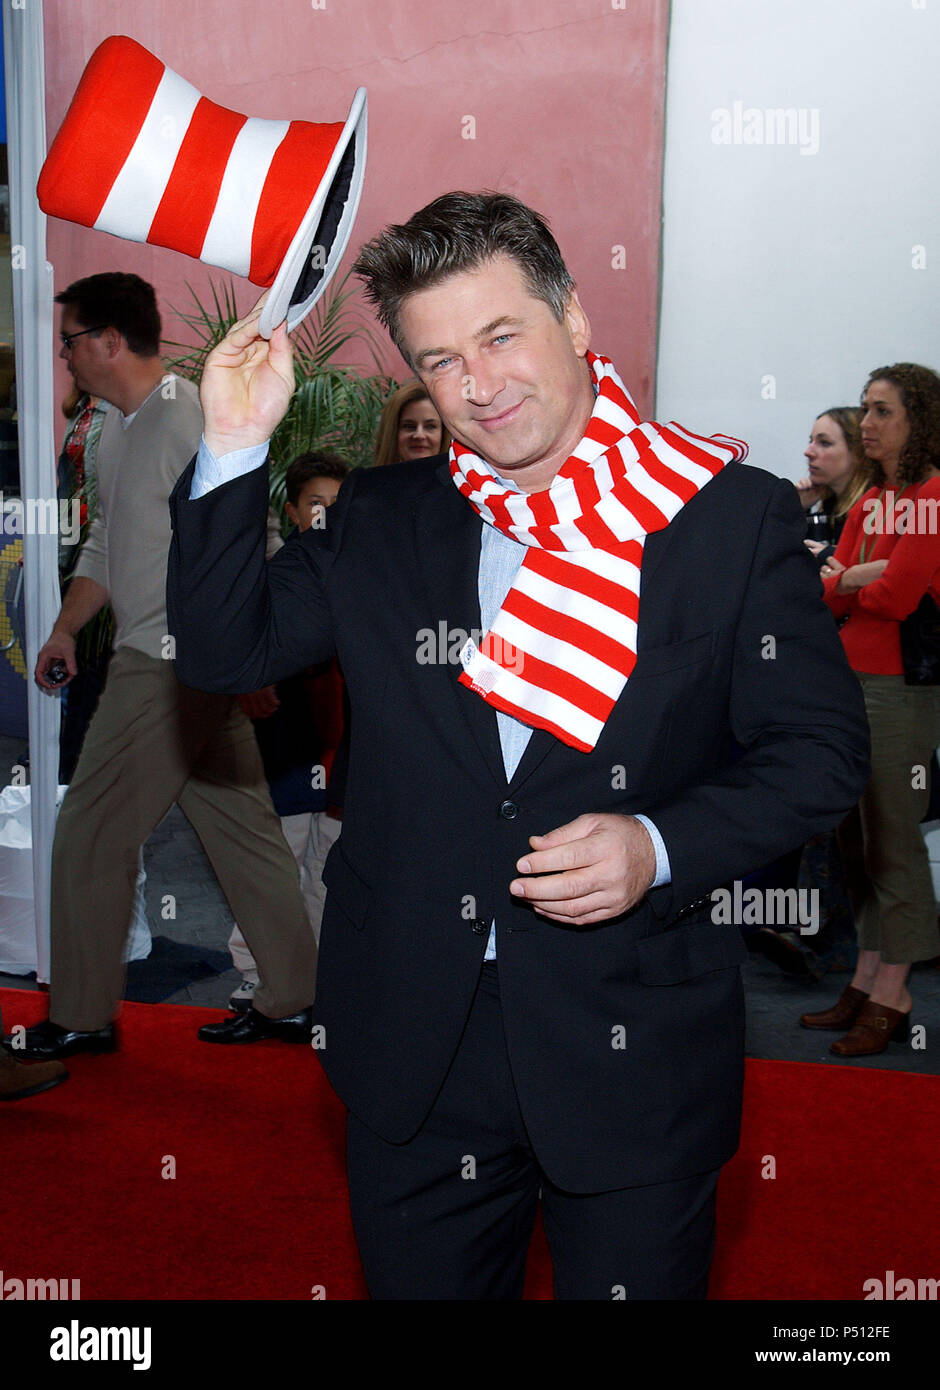 Alec Baldwin arriving at the ' Dr. Seuss 'The Cat In The Hat Premiere '   at the Universal Amphitheatre in Los Angeles. November 8, 2003.BaldwinAlec24 Red Carpet Event, Vertical, USA, Film Industry, Celebrities,  Photography, Bestof, Arts Culture and Entertainment, Topix Celebrities fashion /  Vertical, Best of, Event in Hollywood Life - California,  Red Carpet and backstage, USA, Film Industry, Celebrities,  movie celebrities, TV celebrities, Music celebrities, Photography, Bestof, Arts Culture and Entertainment,  Topix, vertical, one person,, from the years , 2003 to 2005, inquiry tsuni@Gamm Stock Photo